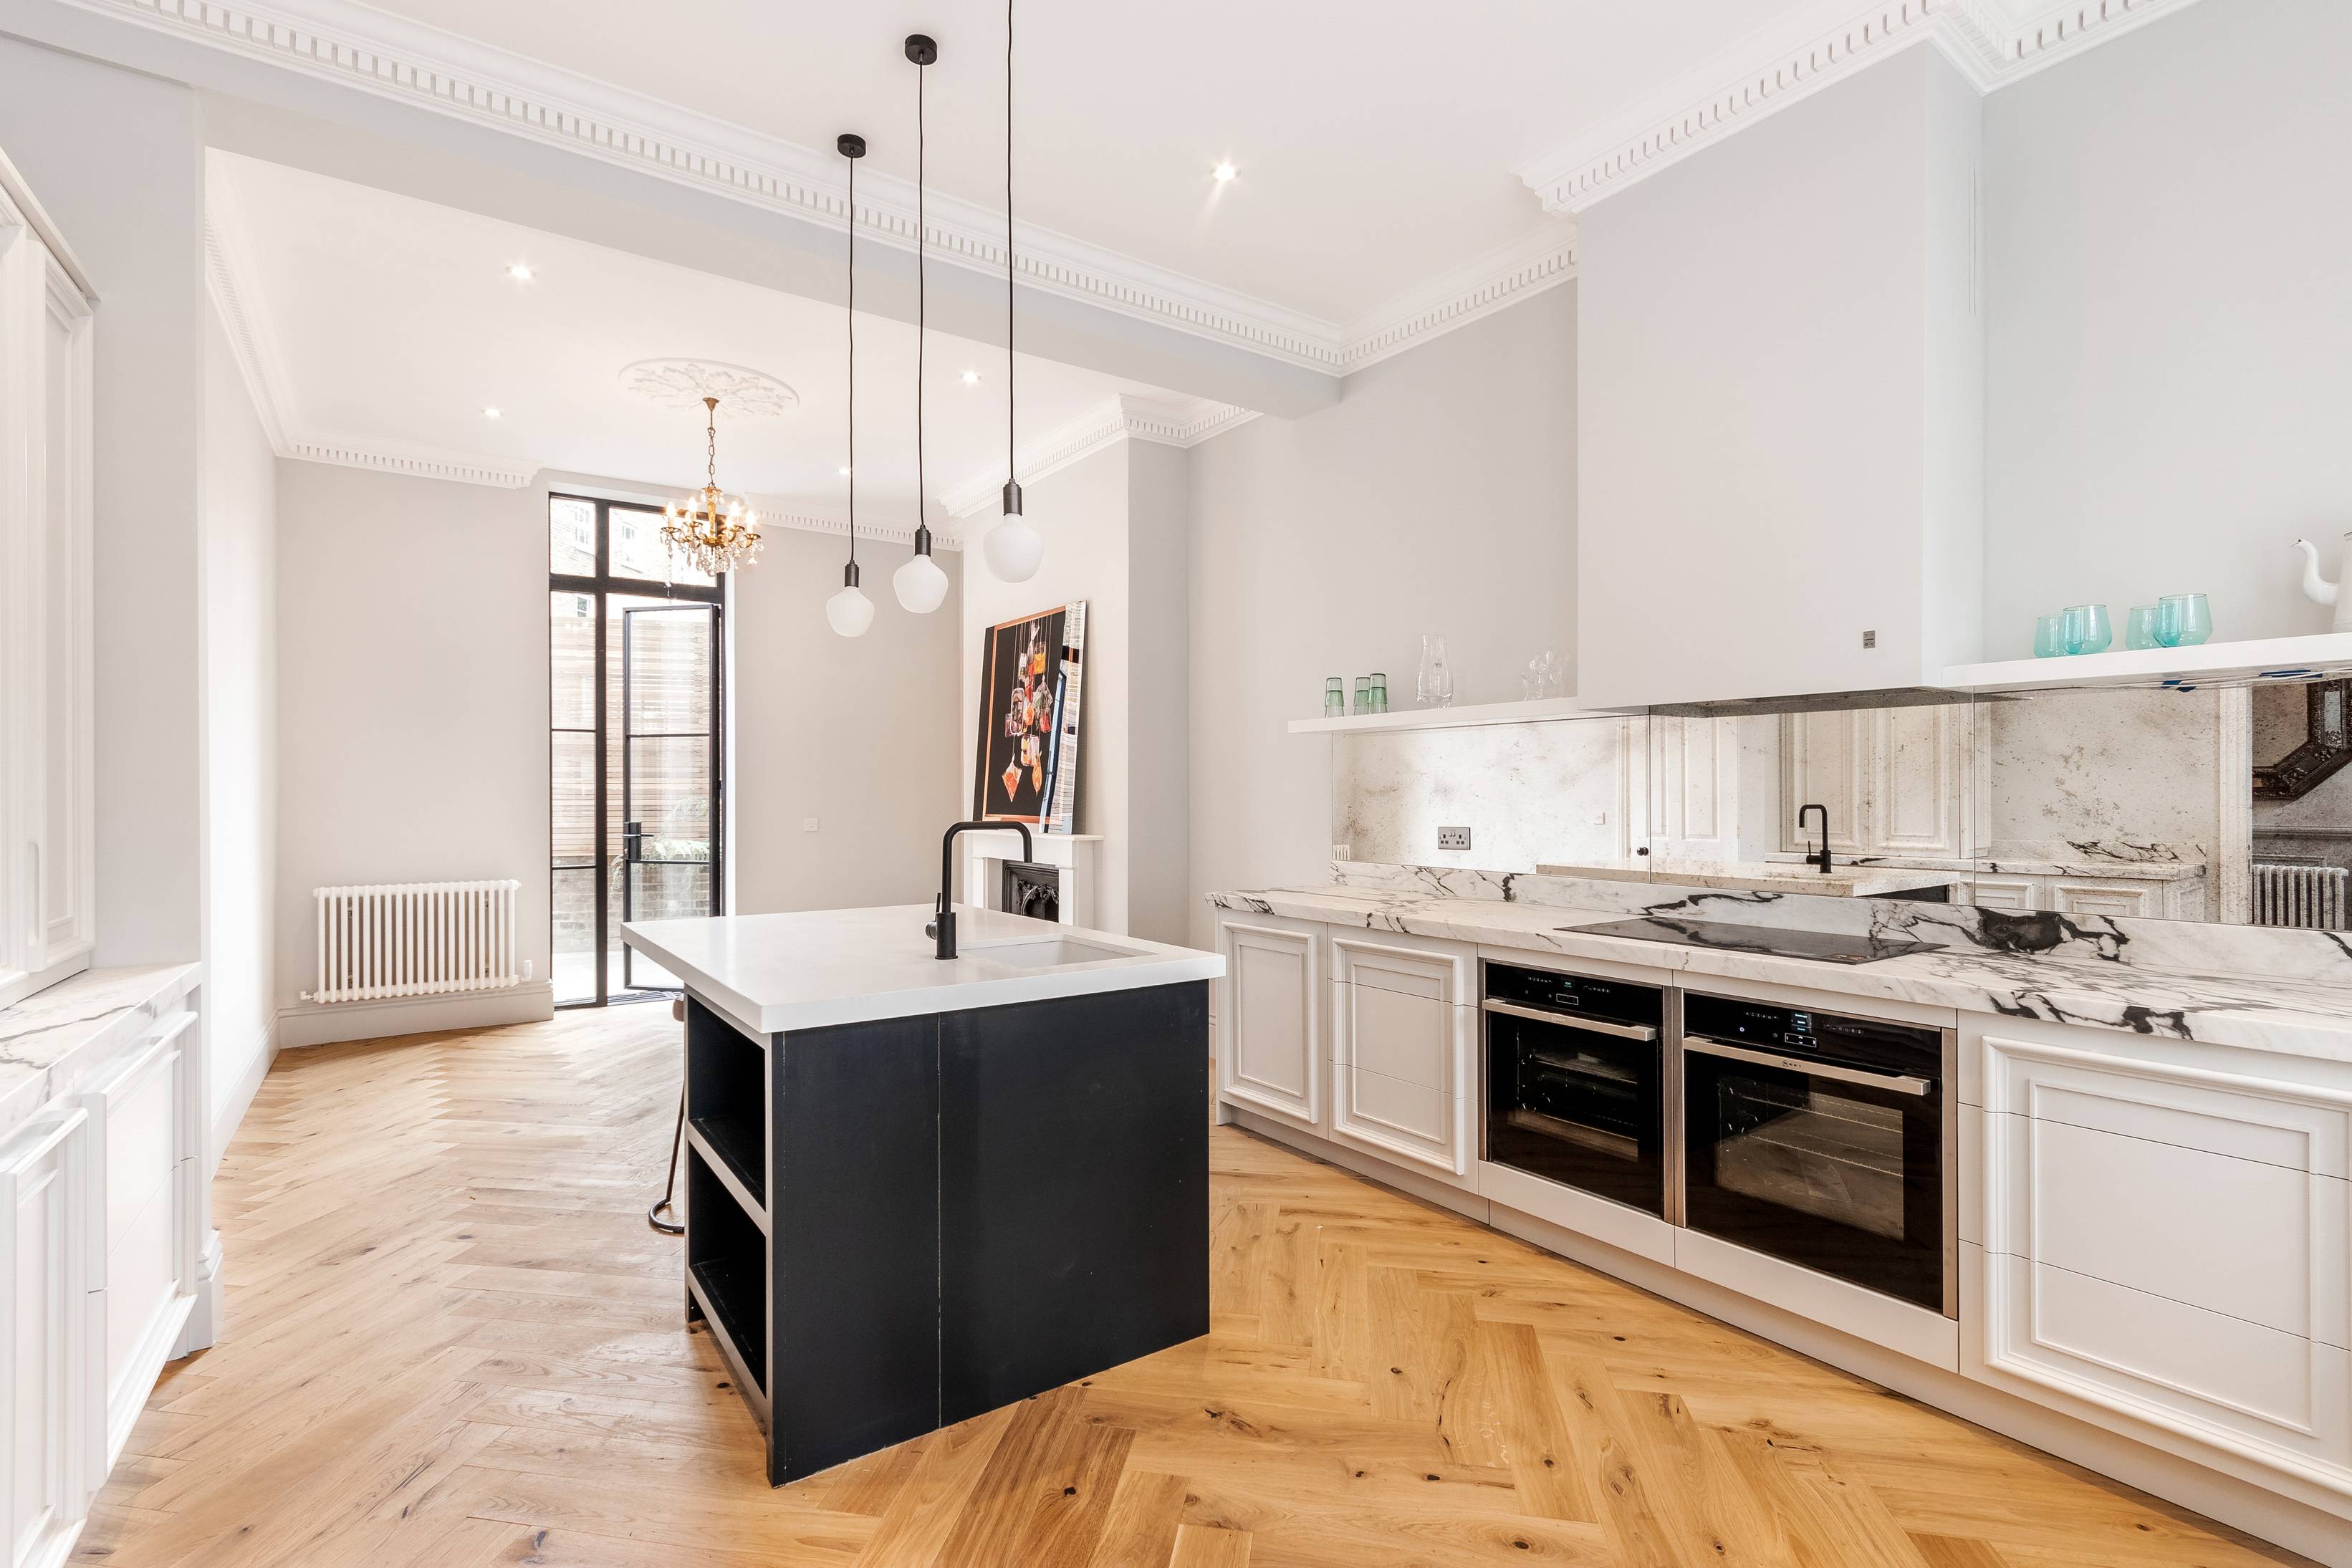 Seriously impressive 6 Bedroom Georgian era townhouse, masterfully renovated to a very high standard from top to bottom by the current owner offering exceptional sense of luxurious living on a highly desirable tree lined Camberwell Grove.